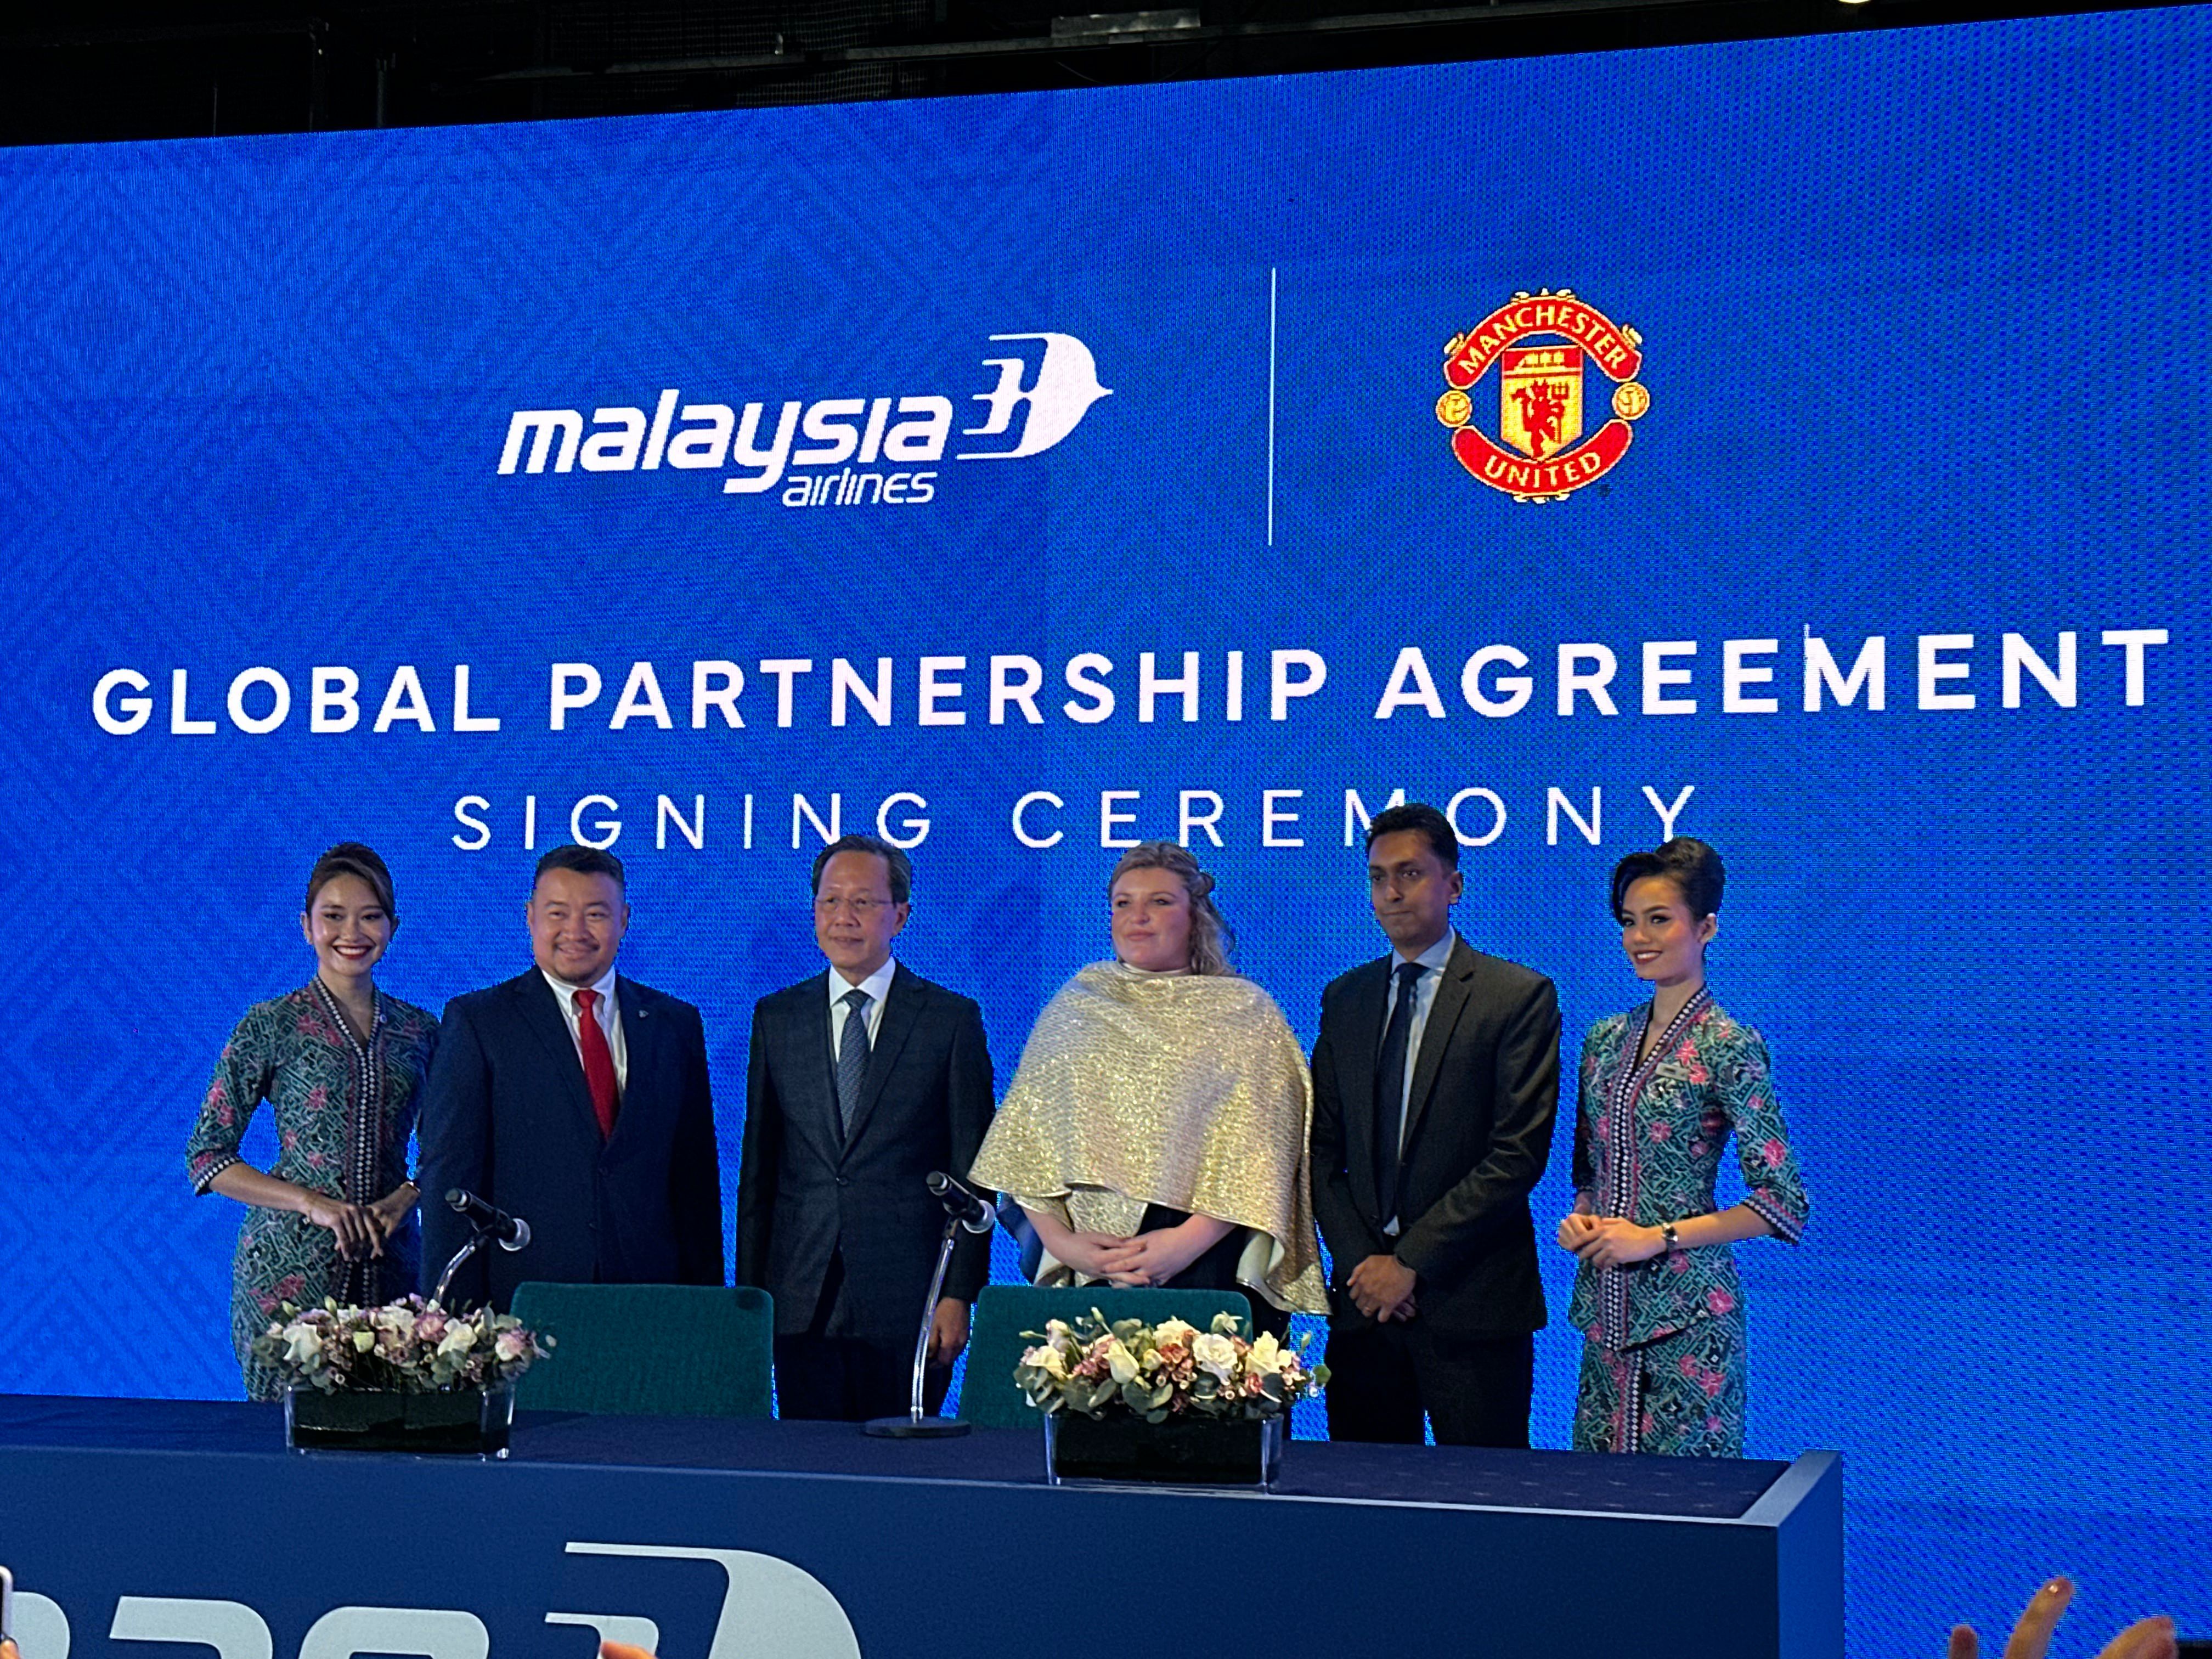 Malaysia Airlines Manchester United Partnership Signing Ceremony